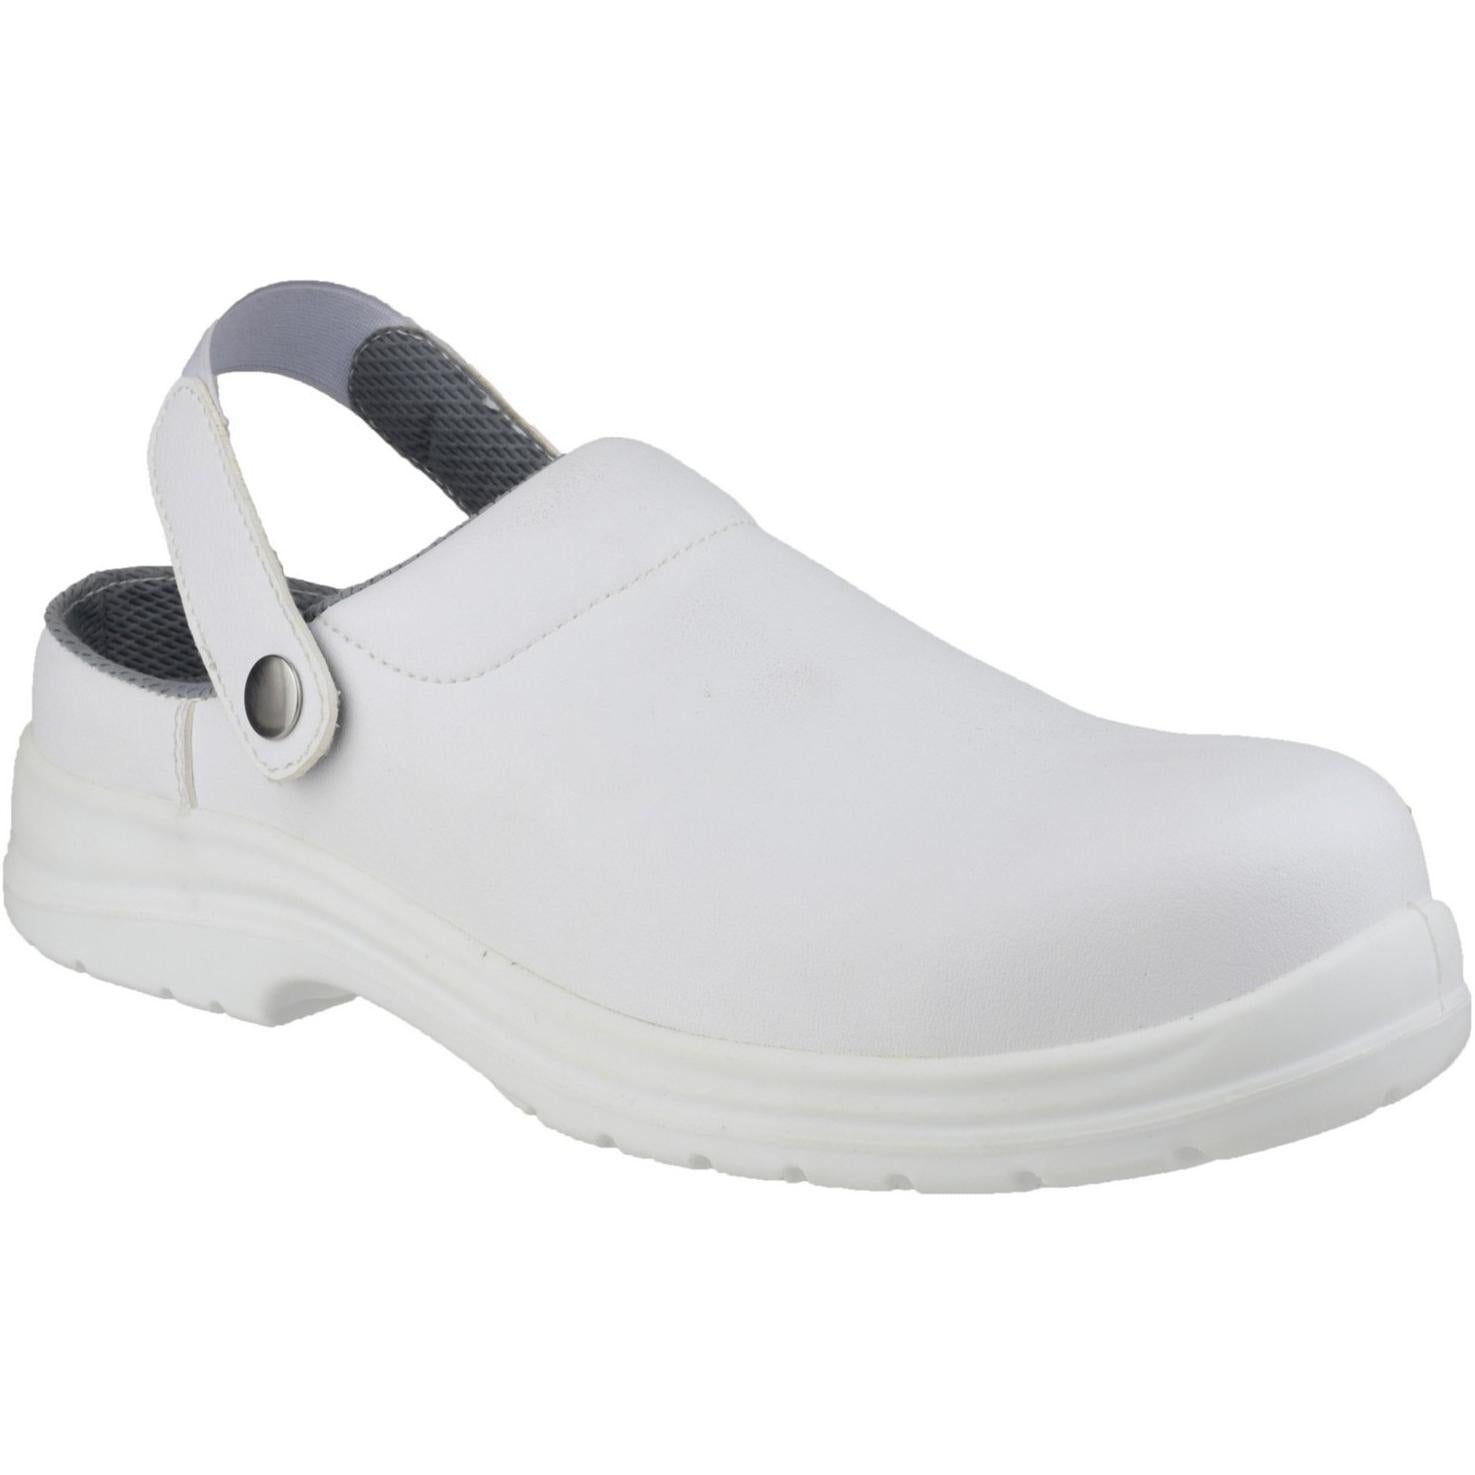 Amblers Safety FS512 Antistatic Slip on Safety Clog Boots